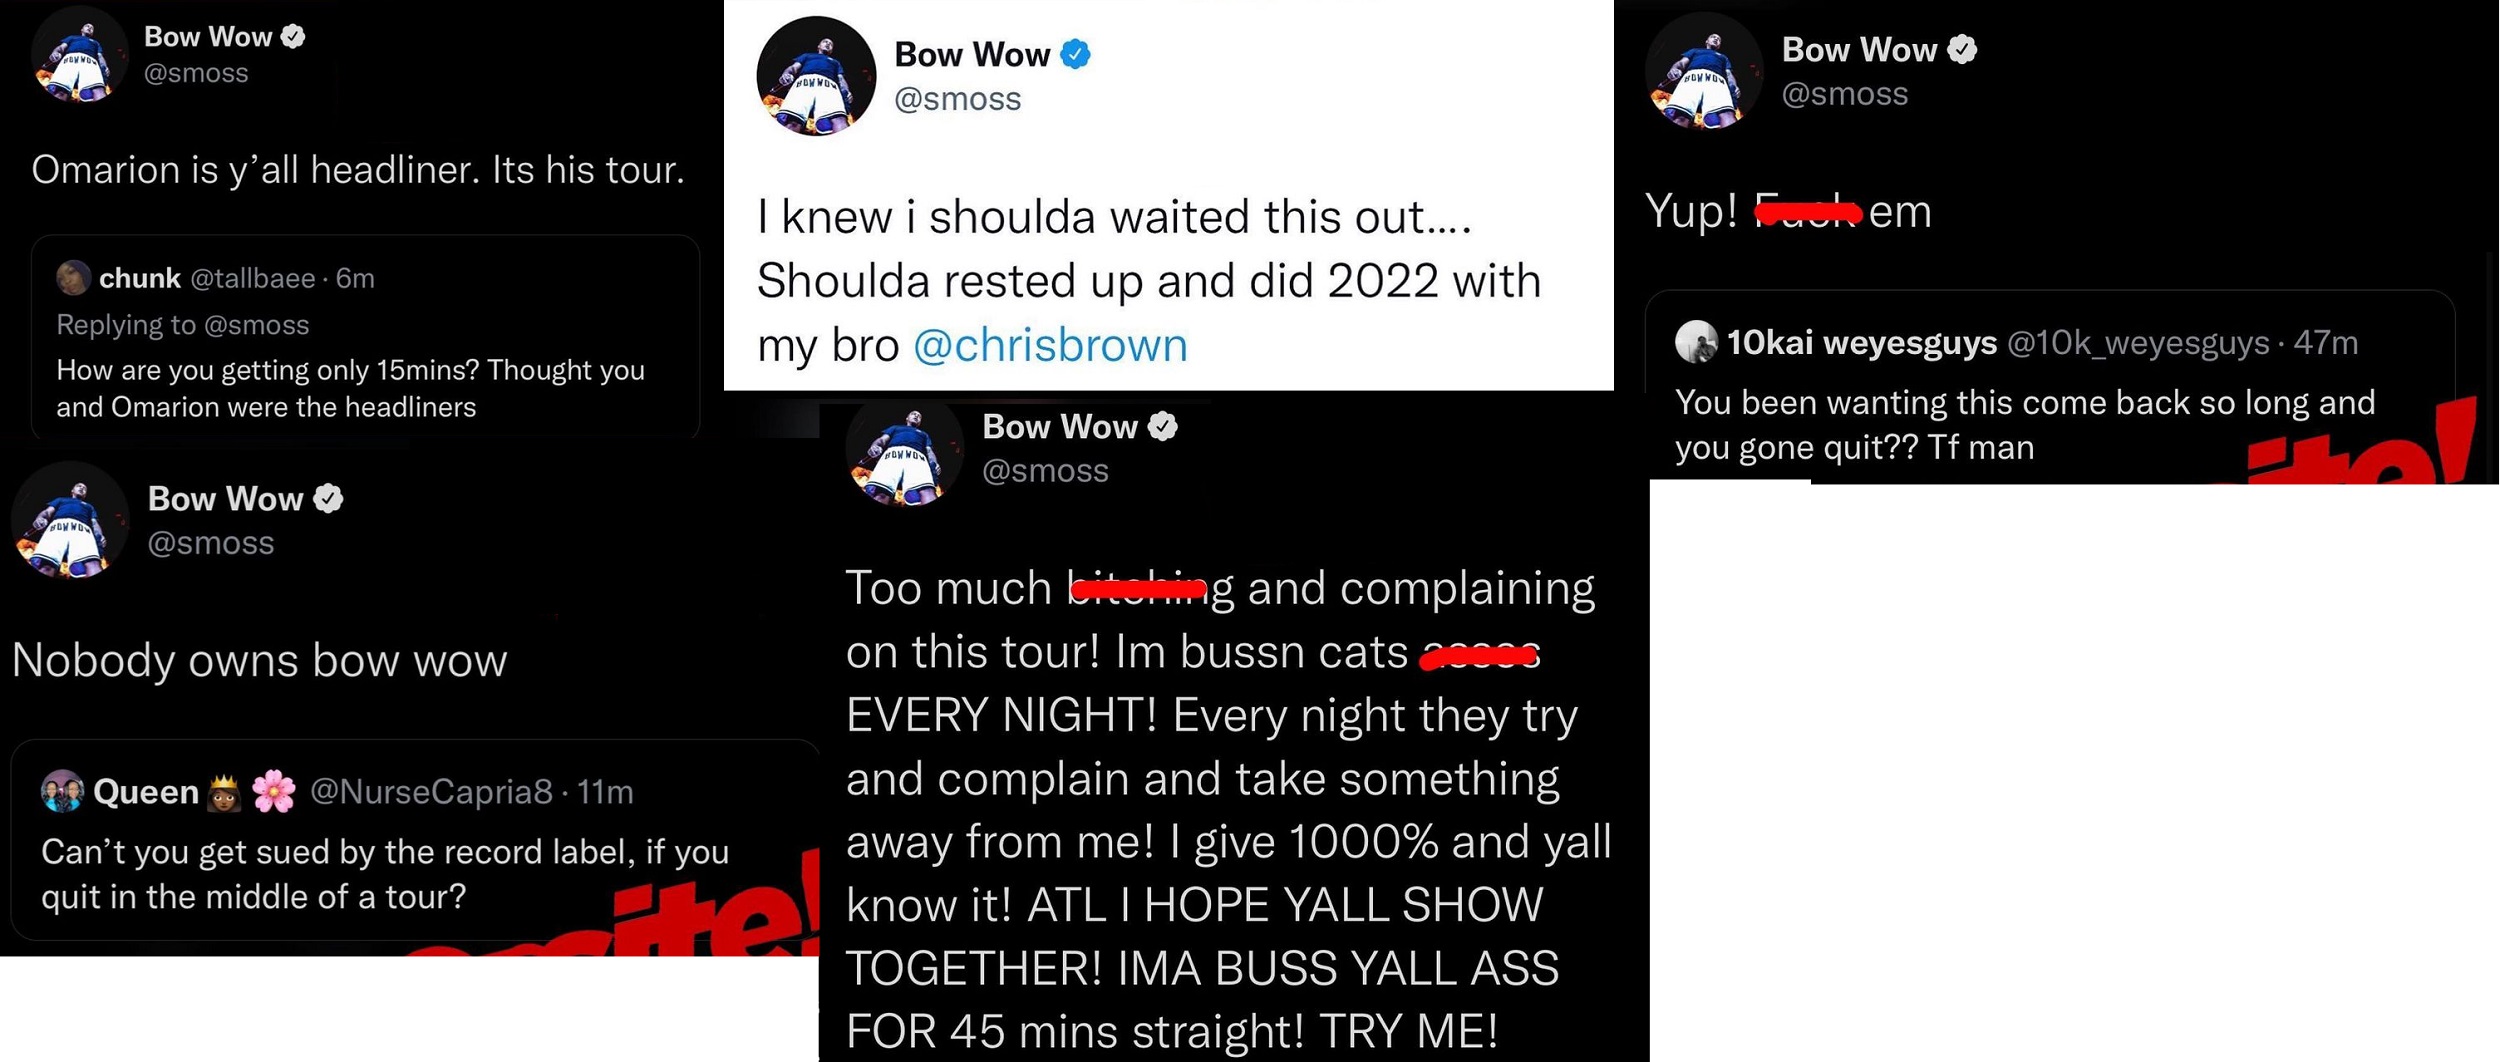 Bow Wow quits The Millennium Tour, says Omarion is the headliner